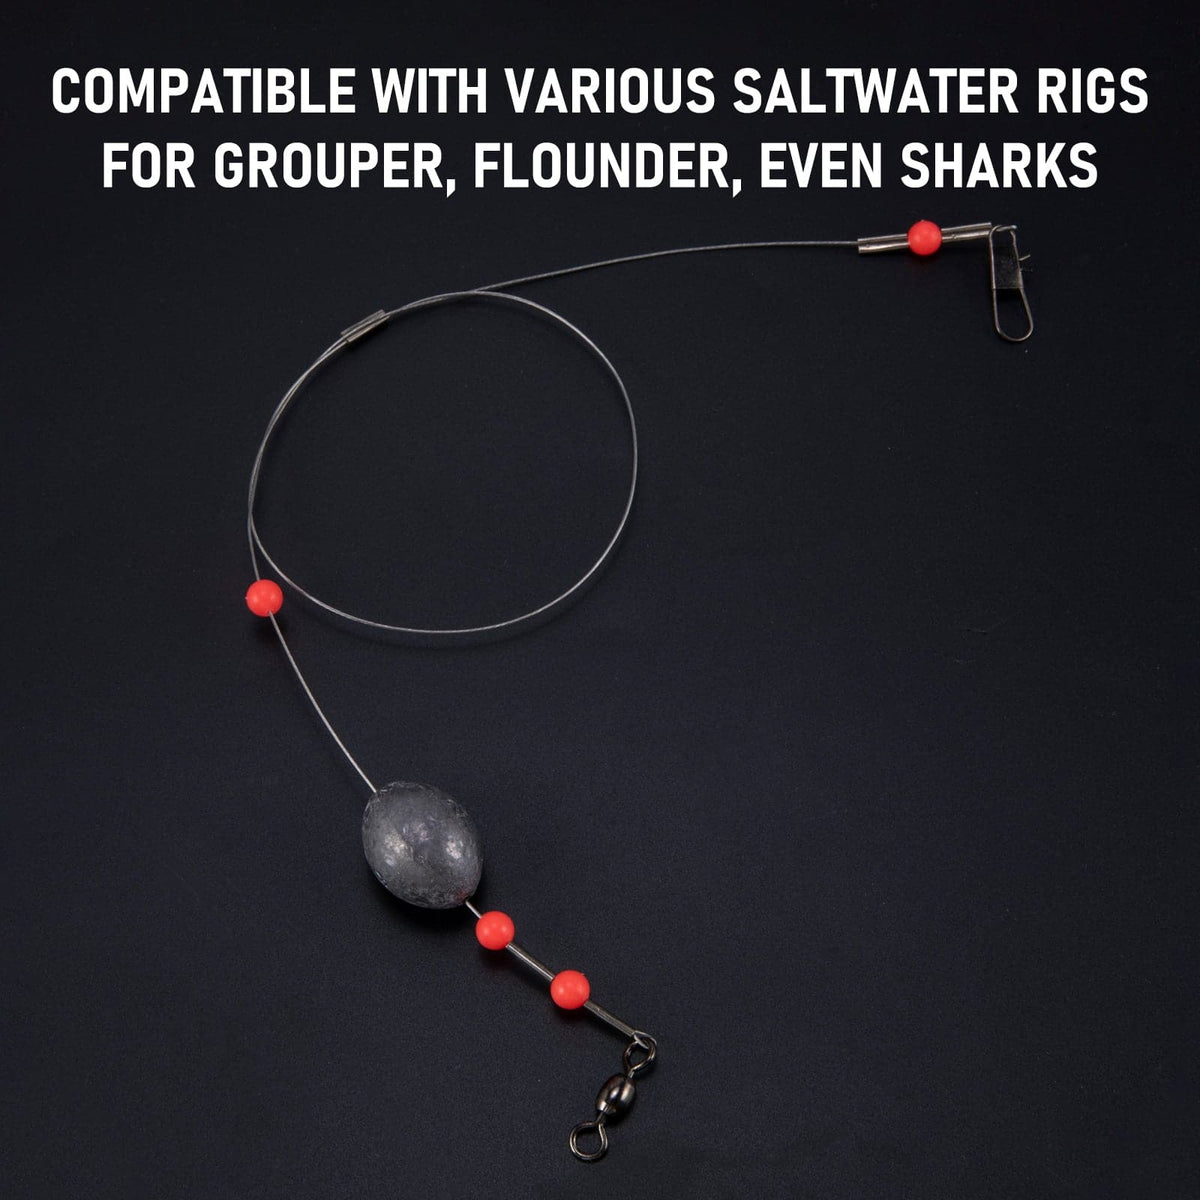 Dr.Fish Egg Sinkers Lead Weights 1/8 to 5oz